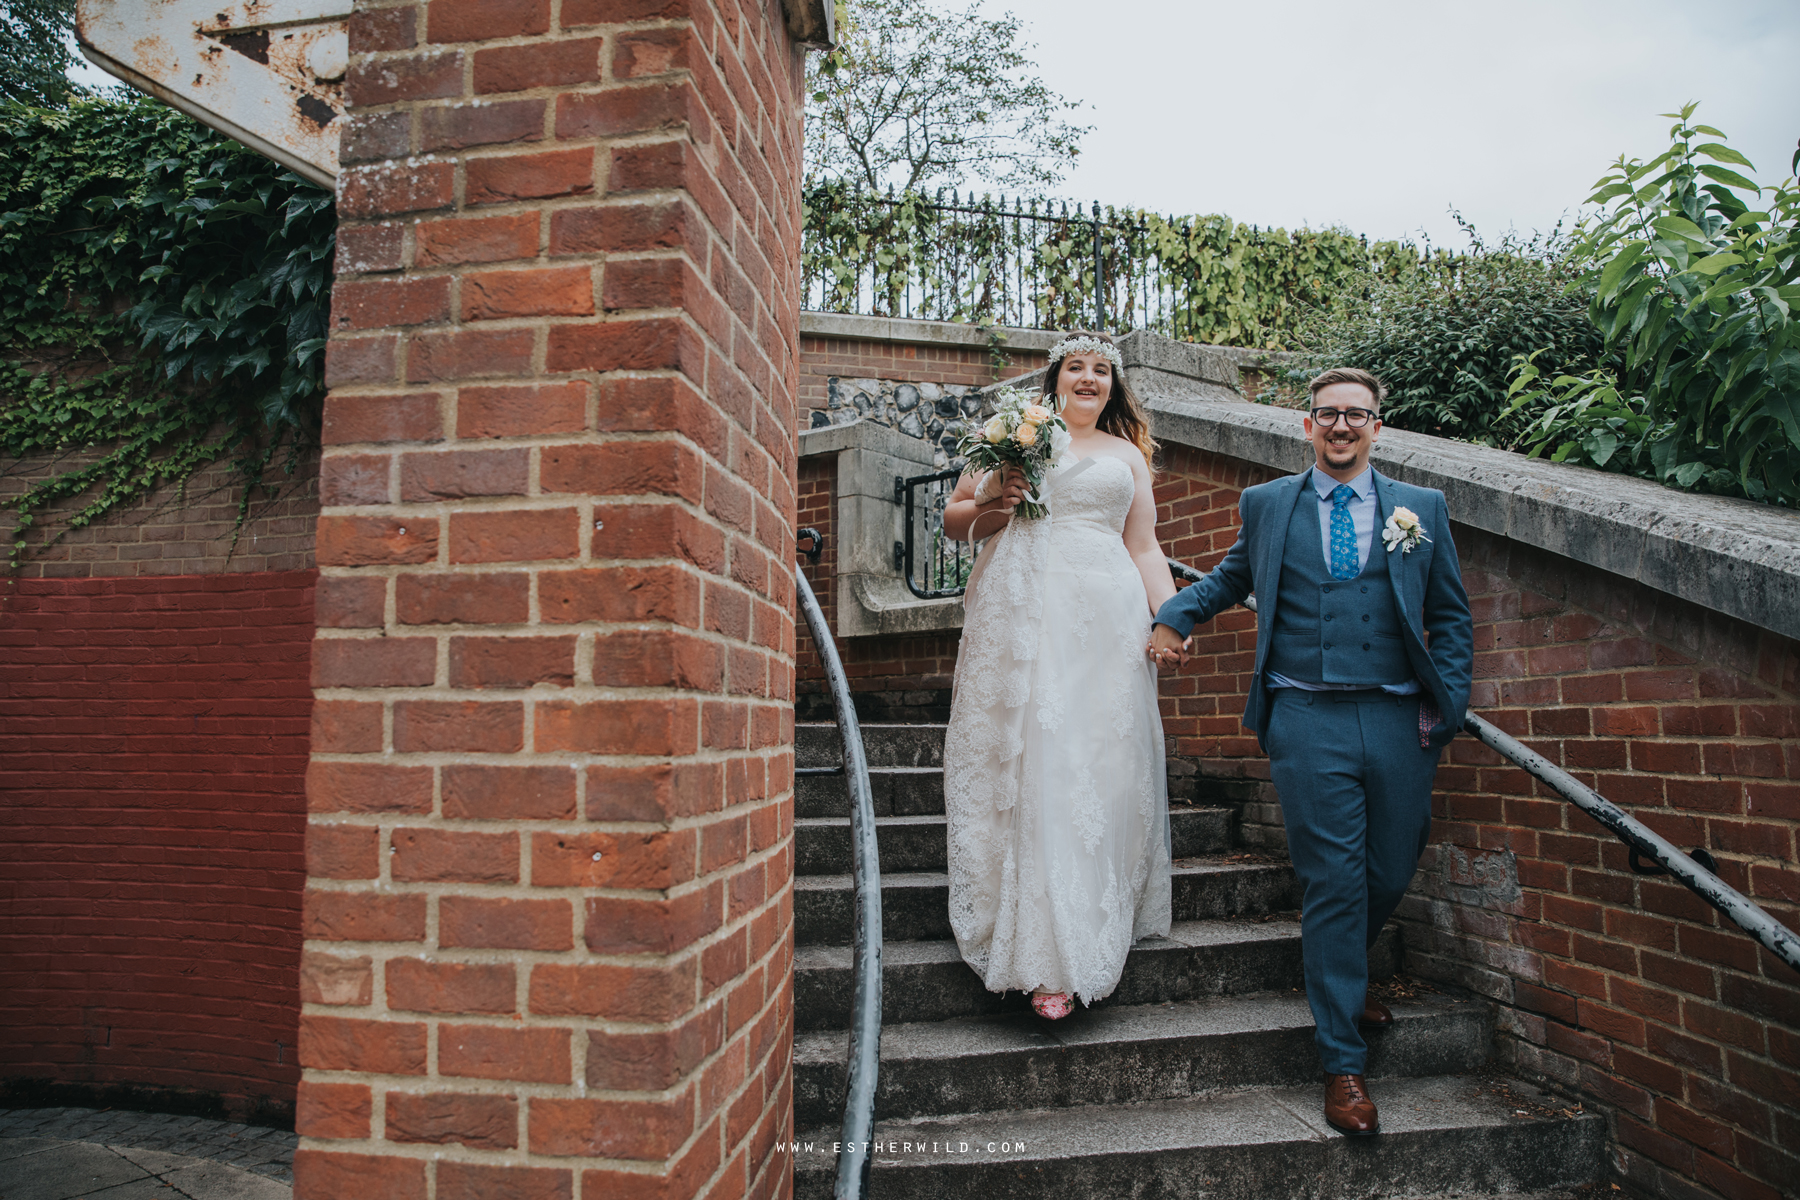 Norwich_Castle_Arcade_Grosvenor_Chip_Birdcage_Cathedral_Cloisters_Refectory_Wedding_Photography_Esther_Wild_Photographer_Norfolk_Kings_Lynn_3R8A1236.jpg